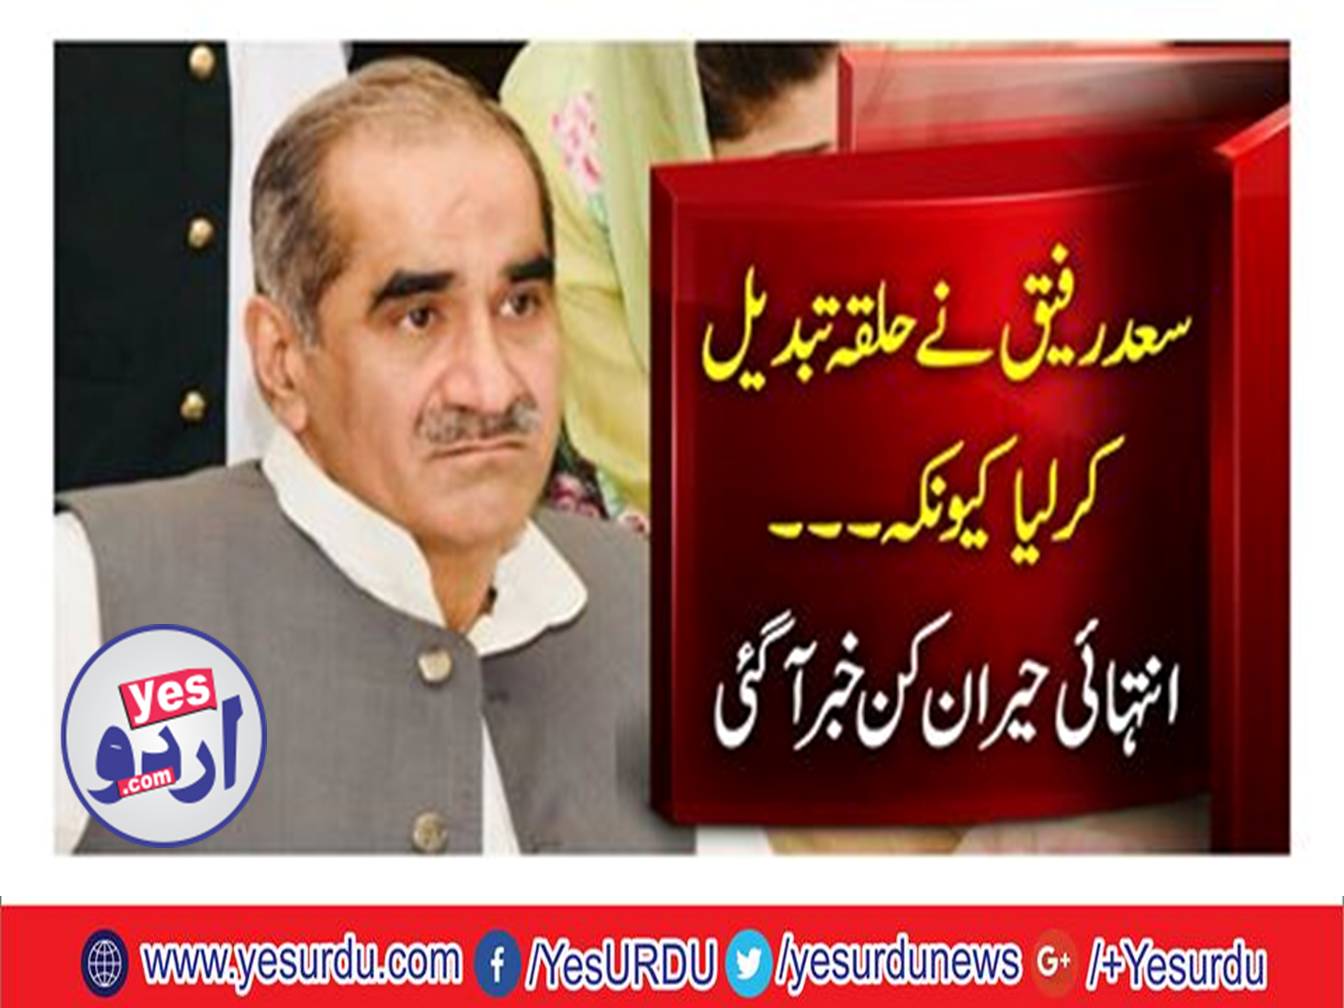 Khawaja Saad Rafique changed the provincial constituency, will contest 168 instead of 157